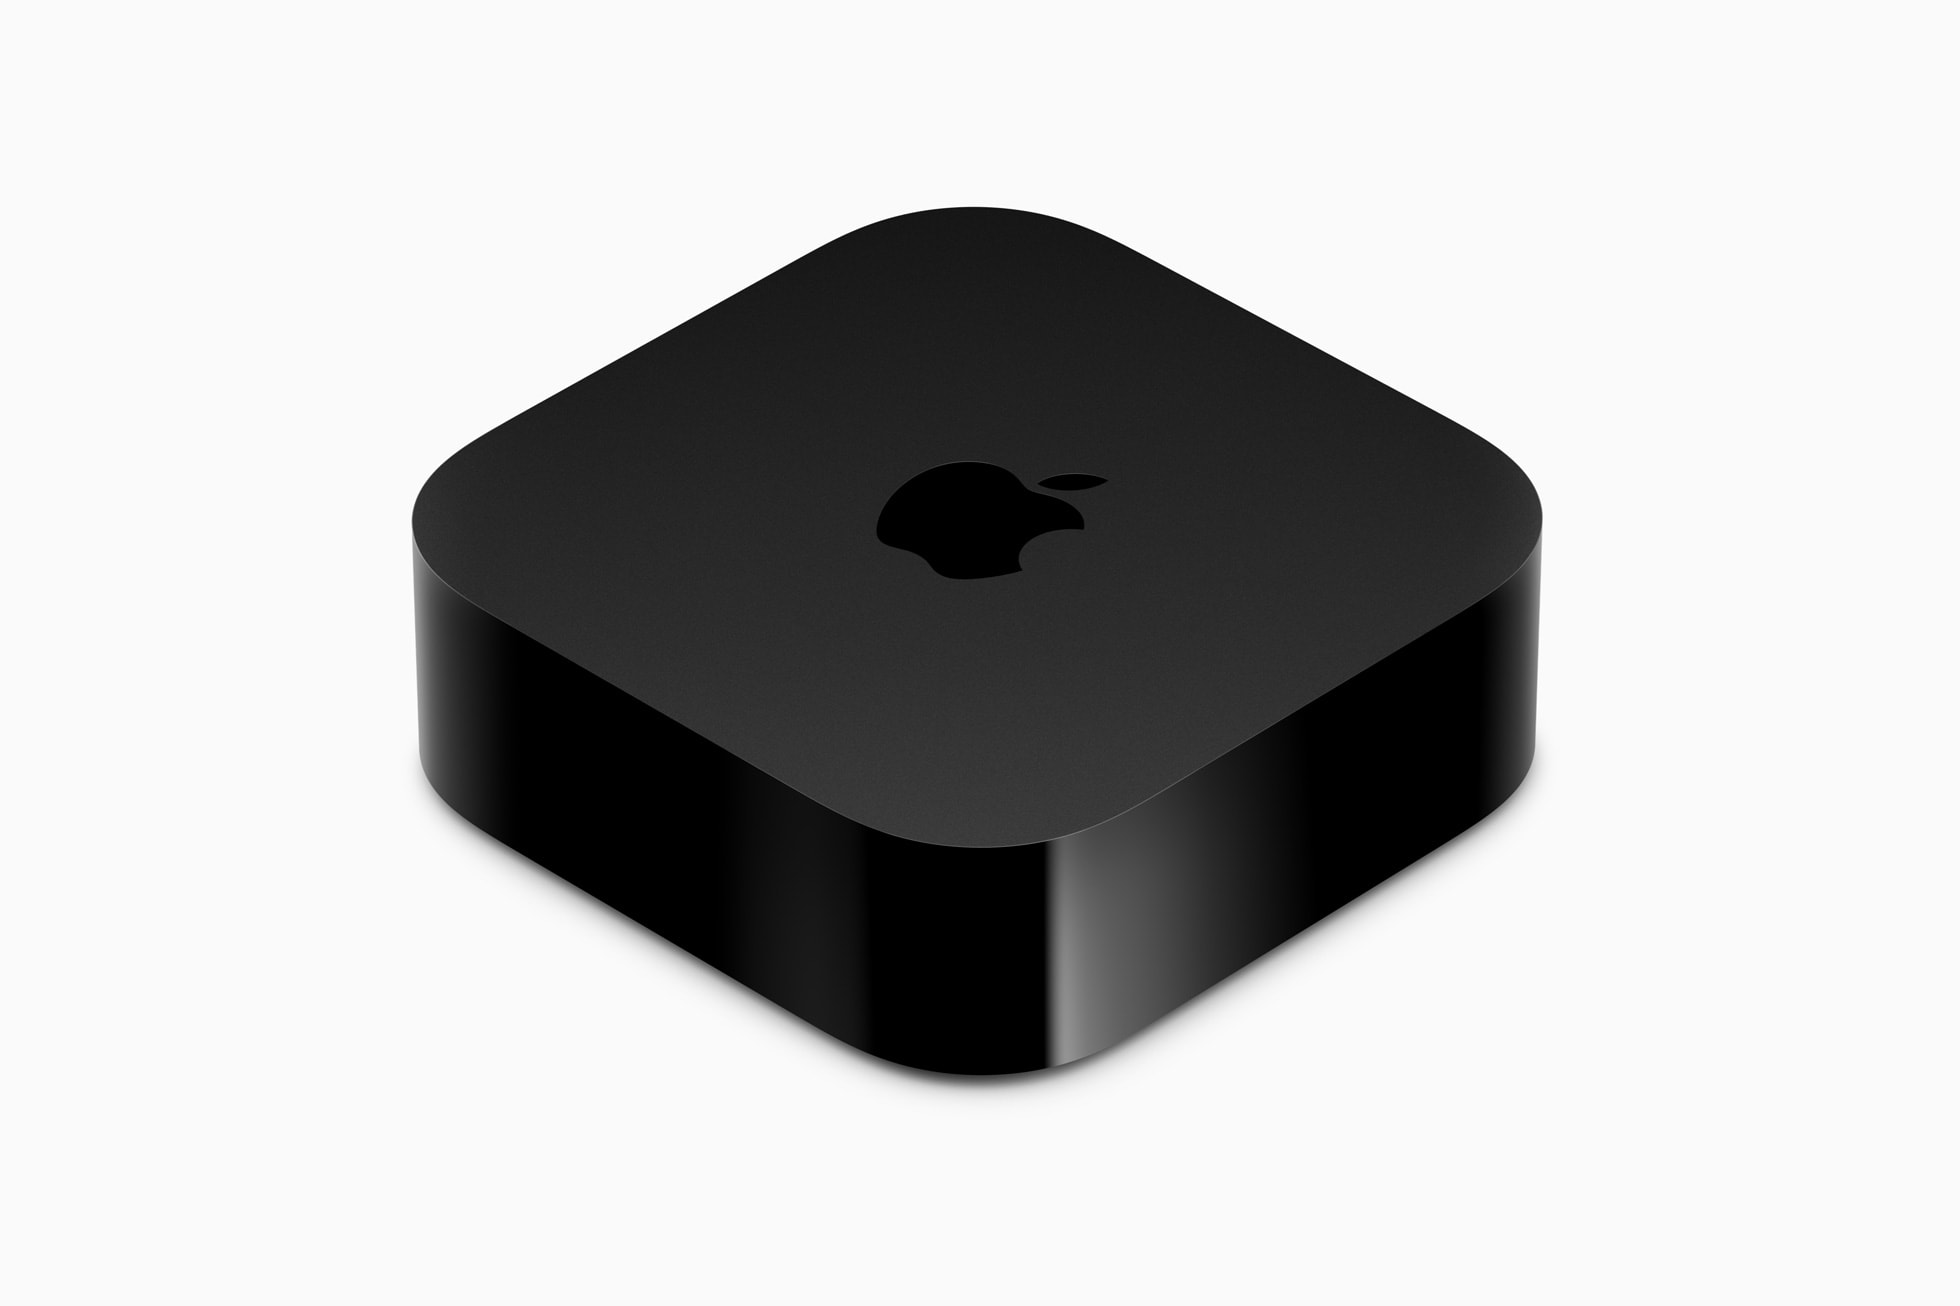 The Apple TV Gets an Update With tvOS 16.3